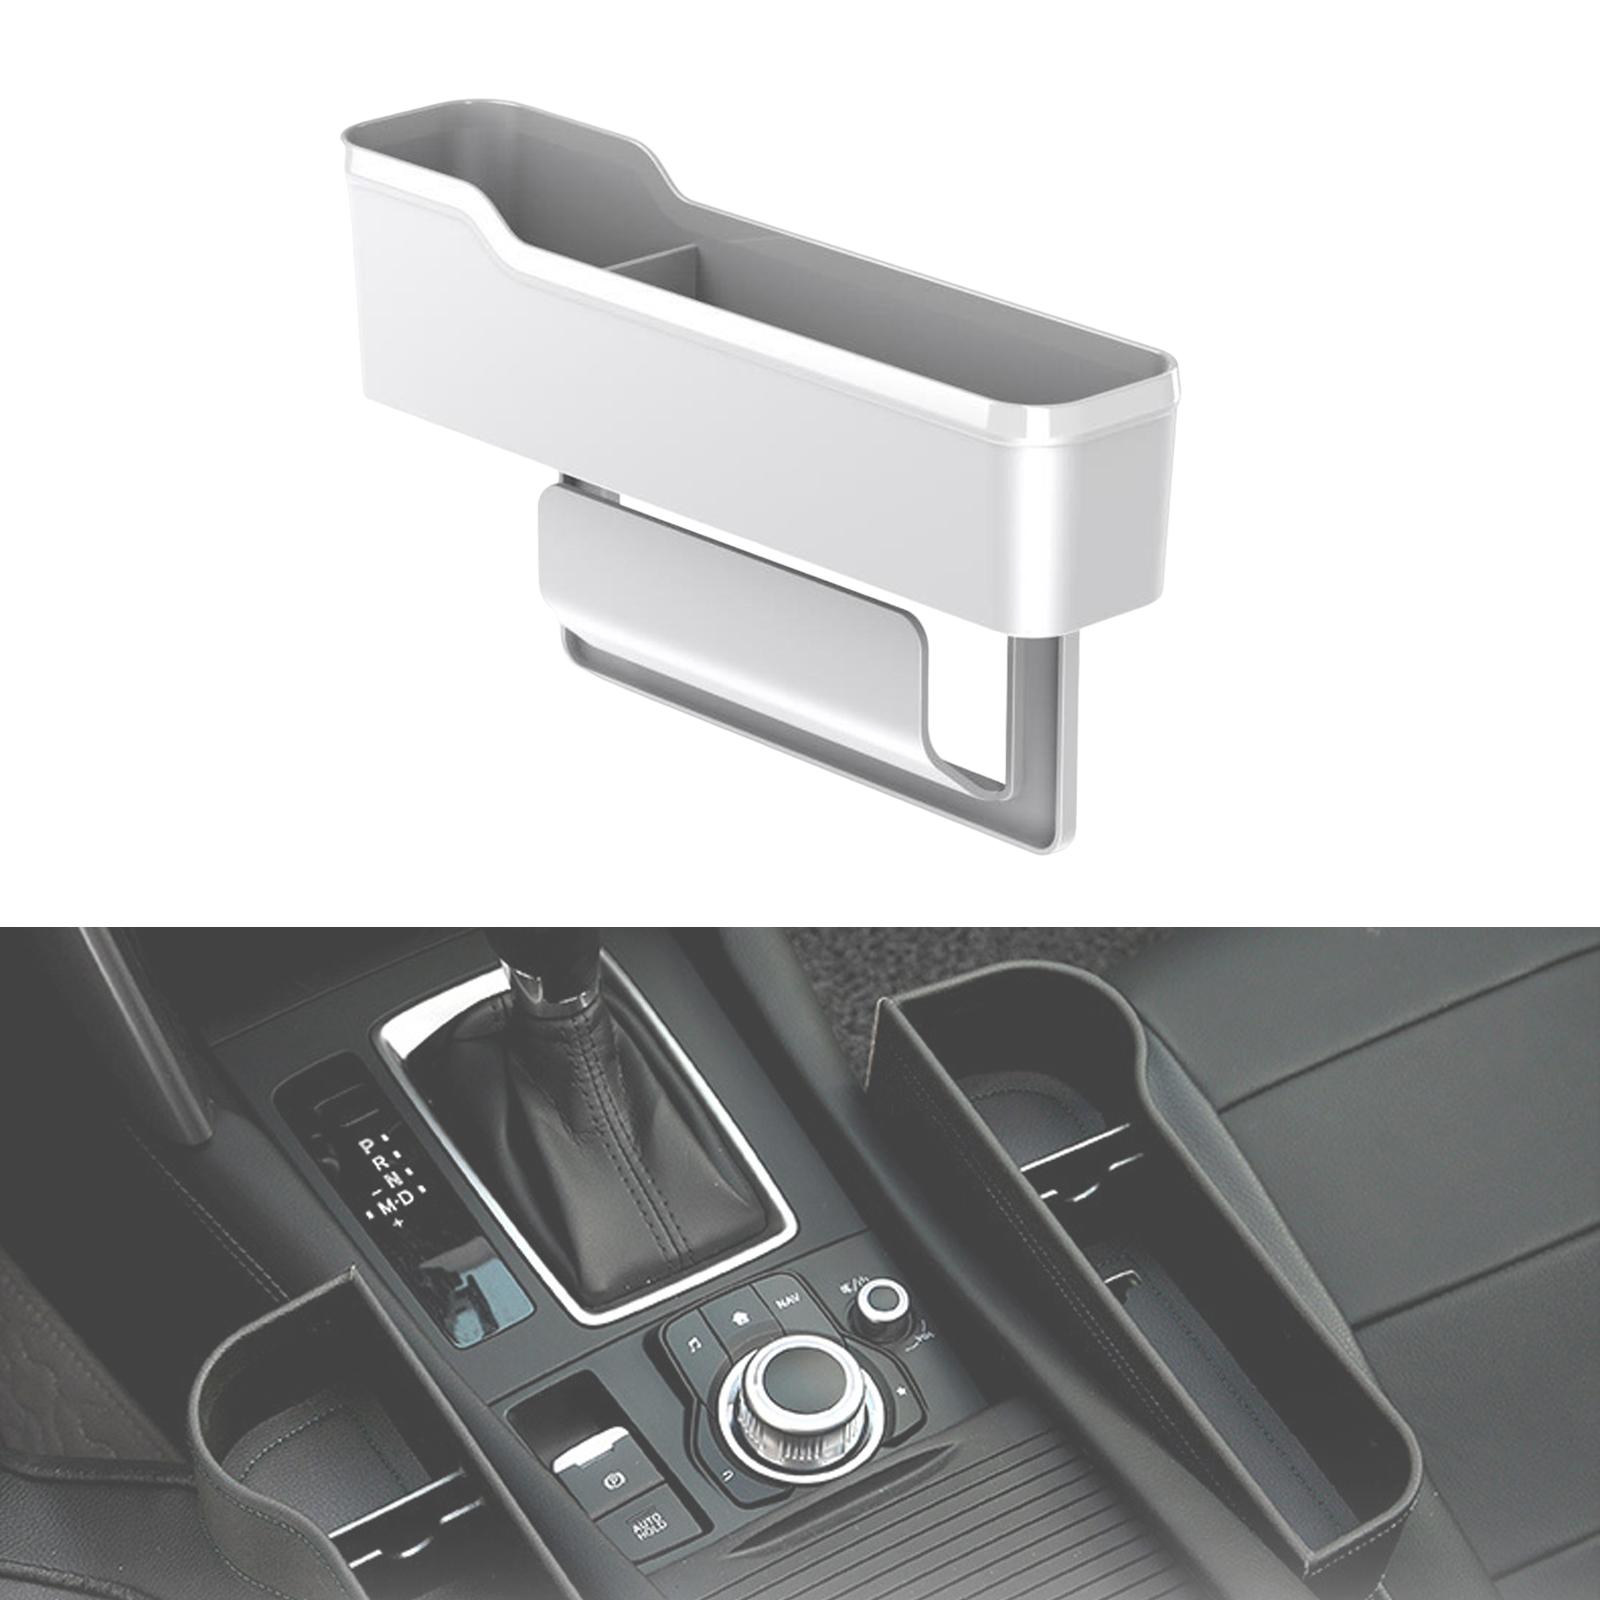 Car Interior Seat Gap Organizer with Cup Holder Accessory for Holding Phone Long White